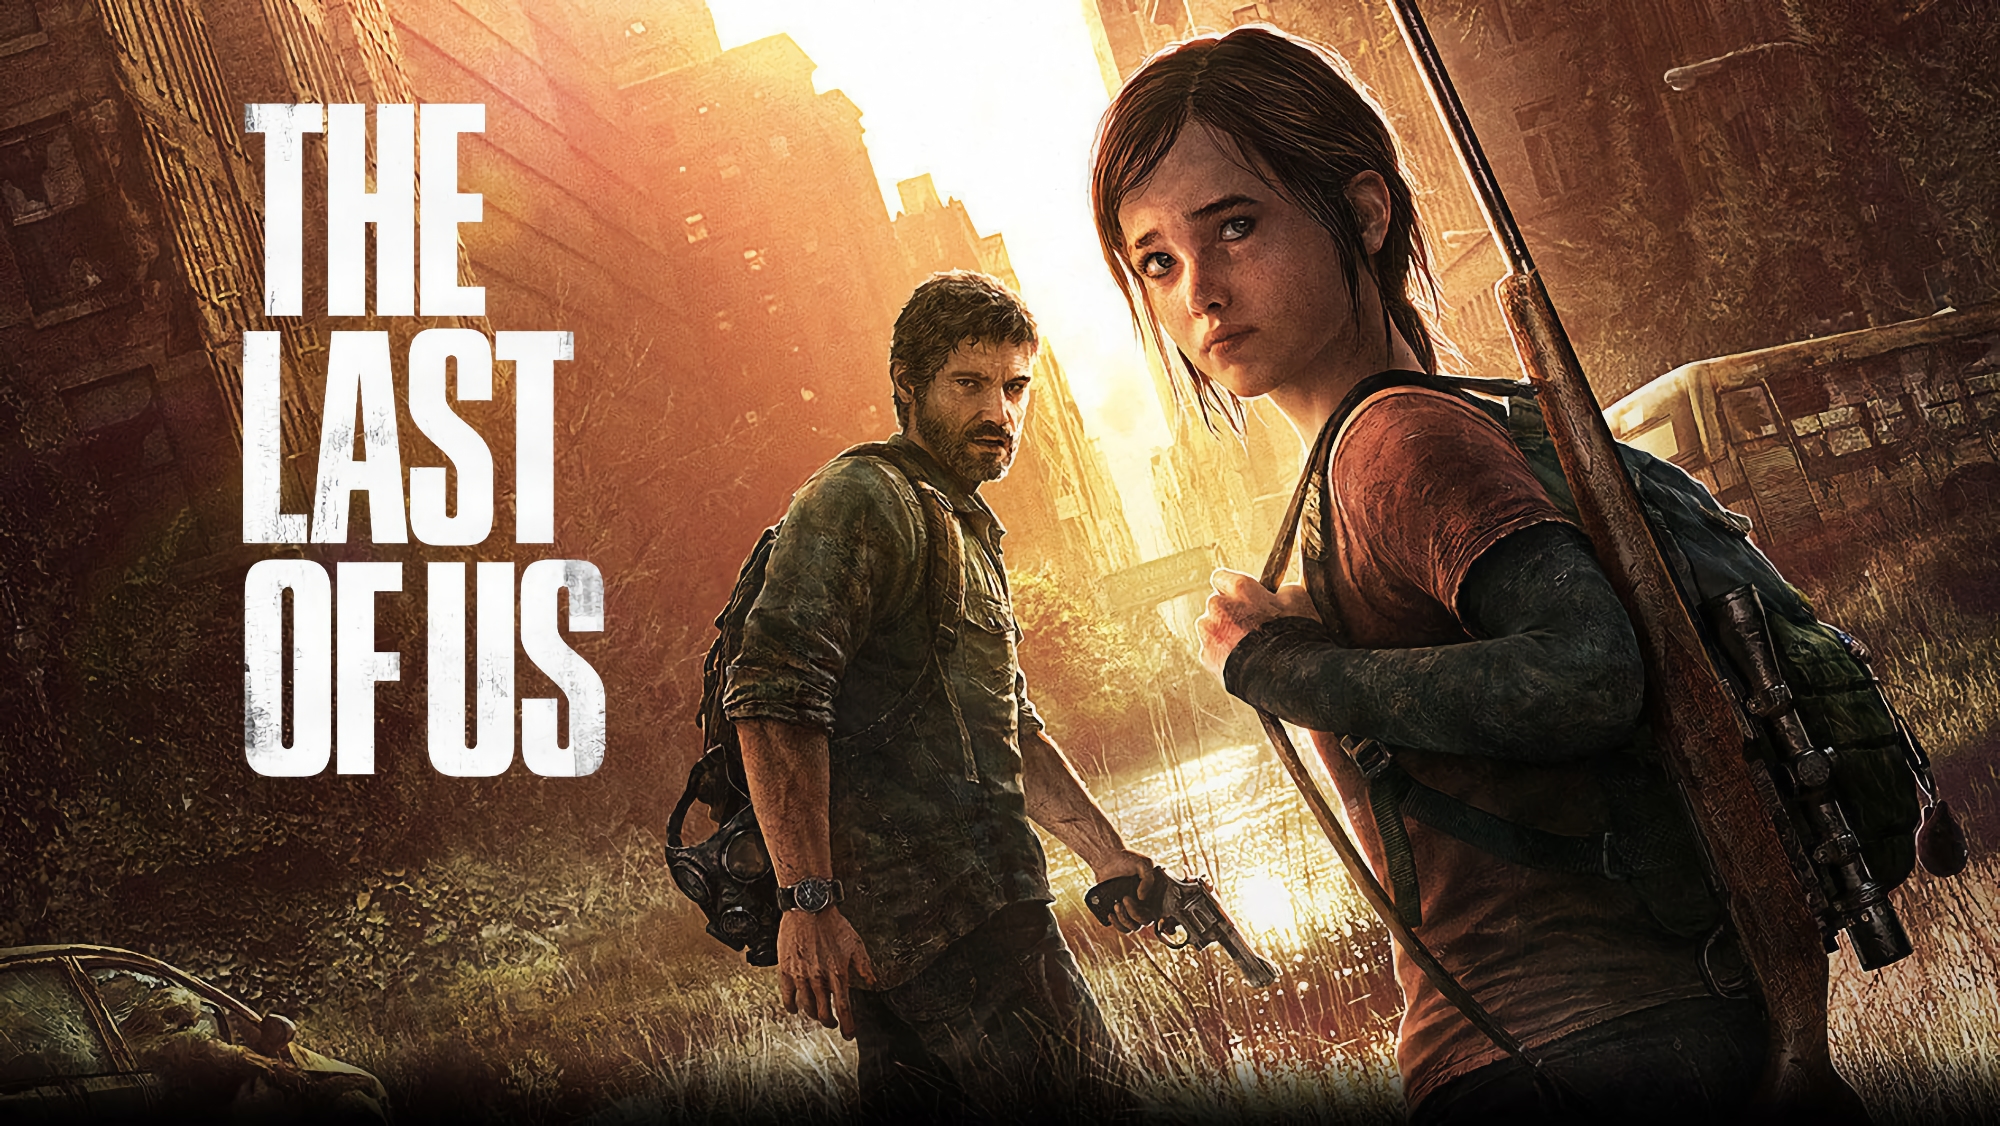 Де ласт. Джоэл the last of us 2013. Элли the last of us 1 Remake.